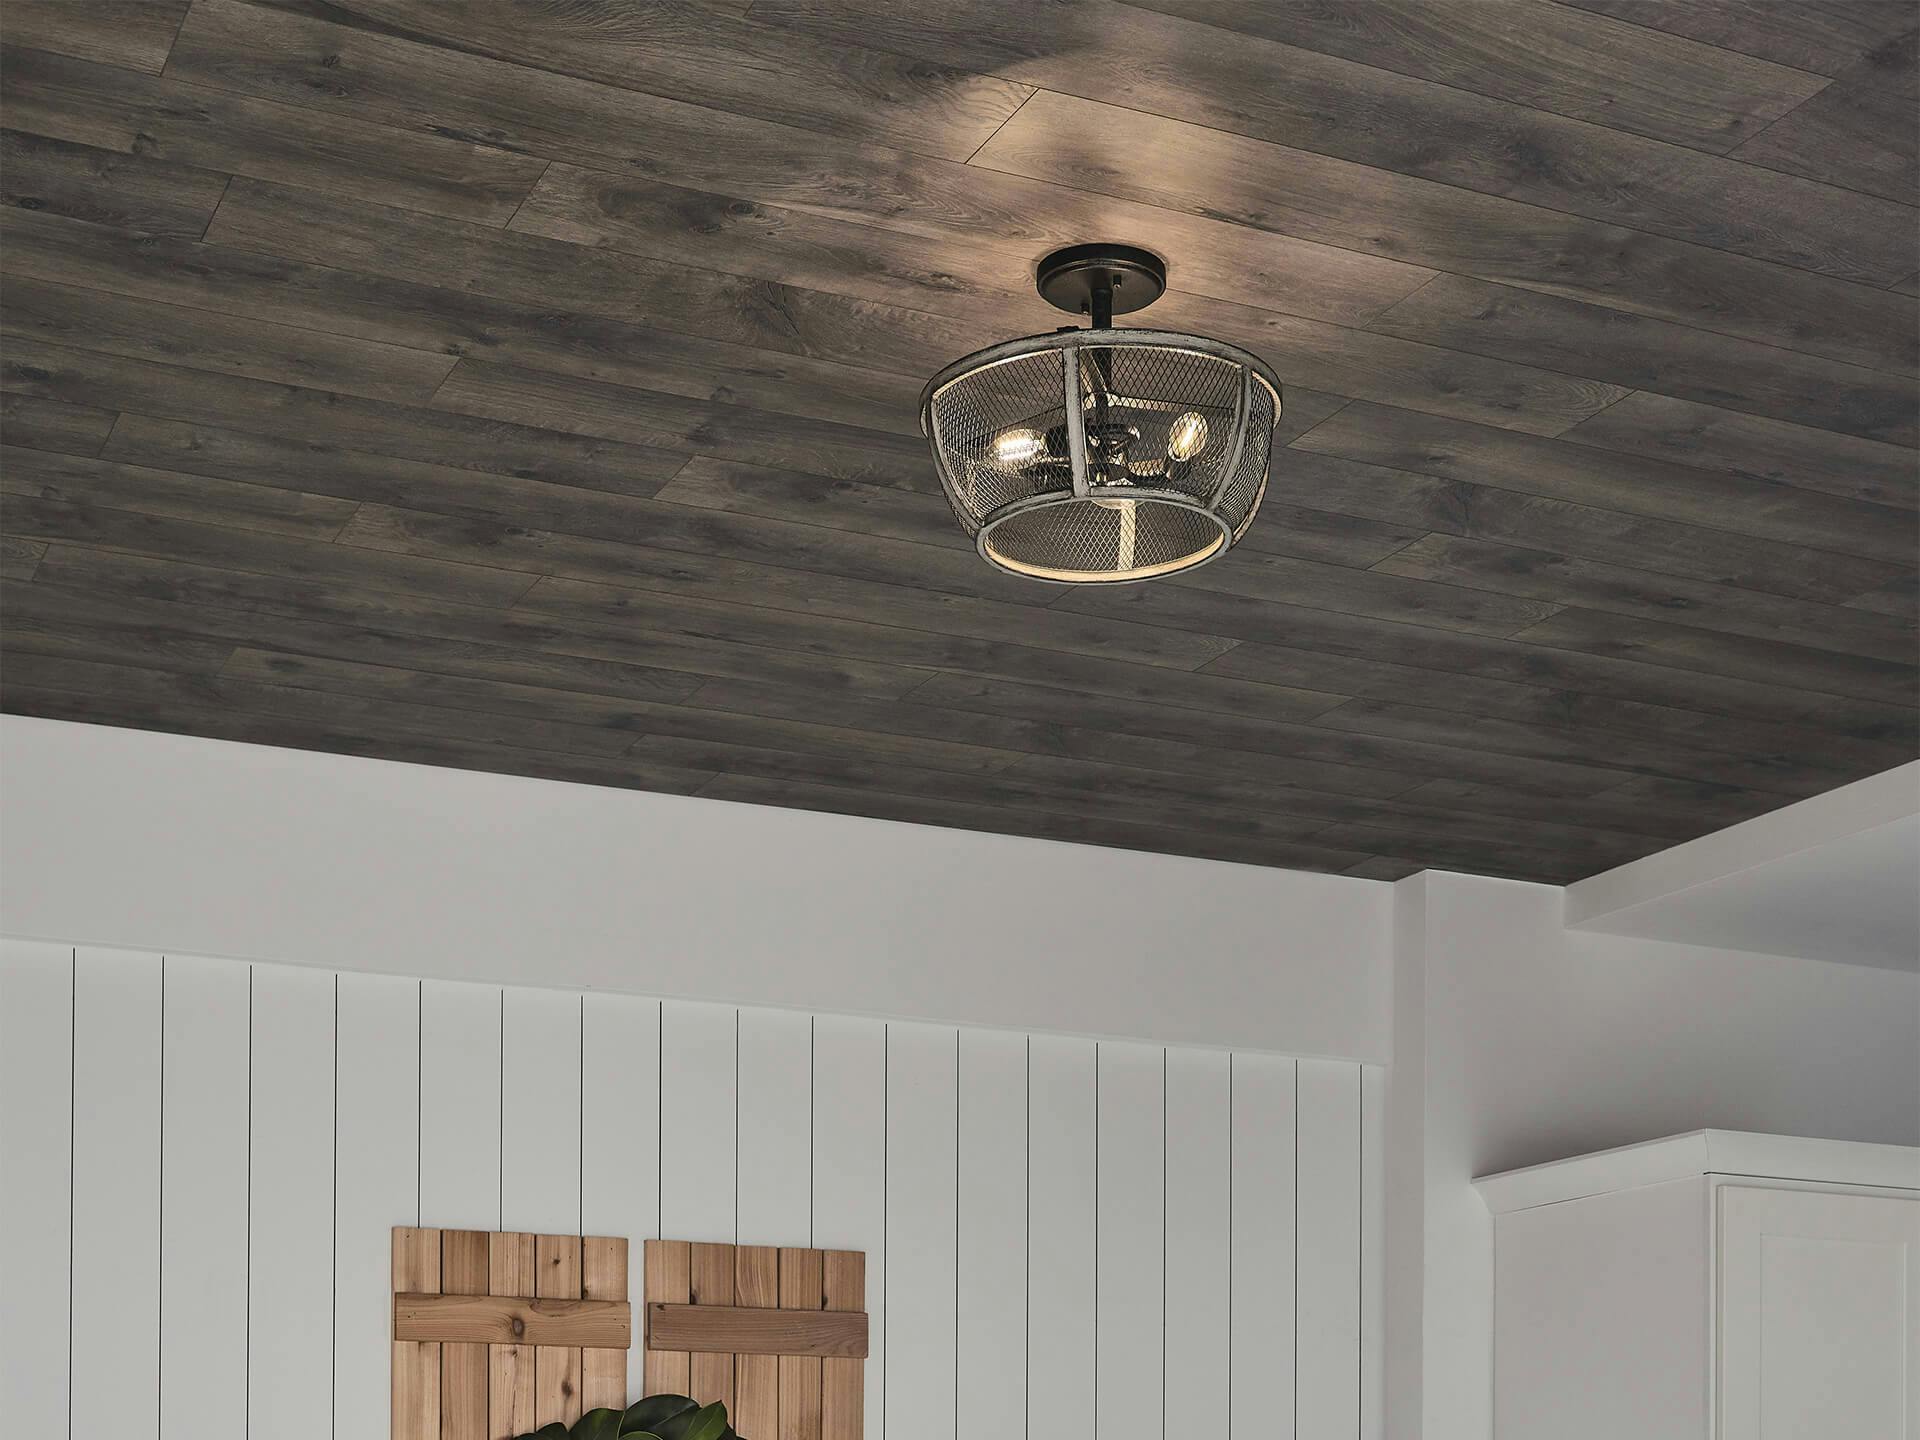 Wood ceiling with a Mascarello mount light glowing